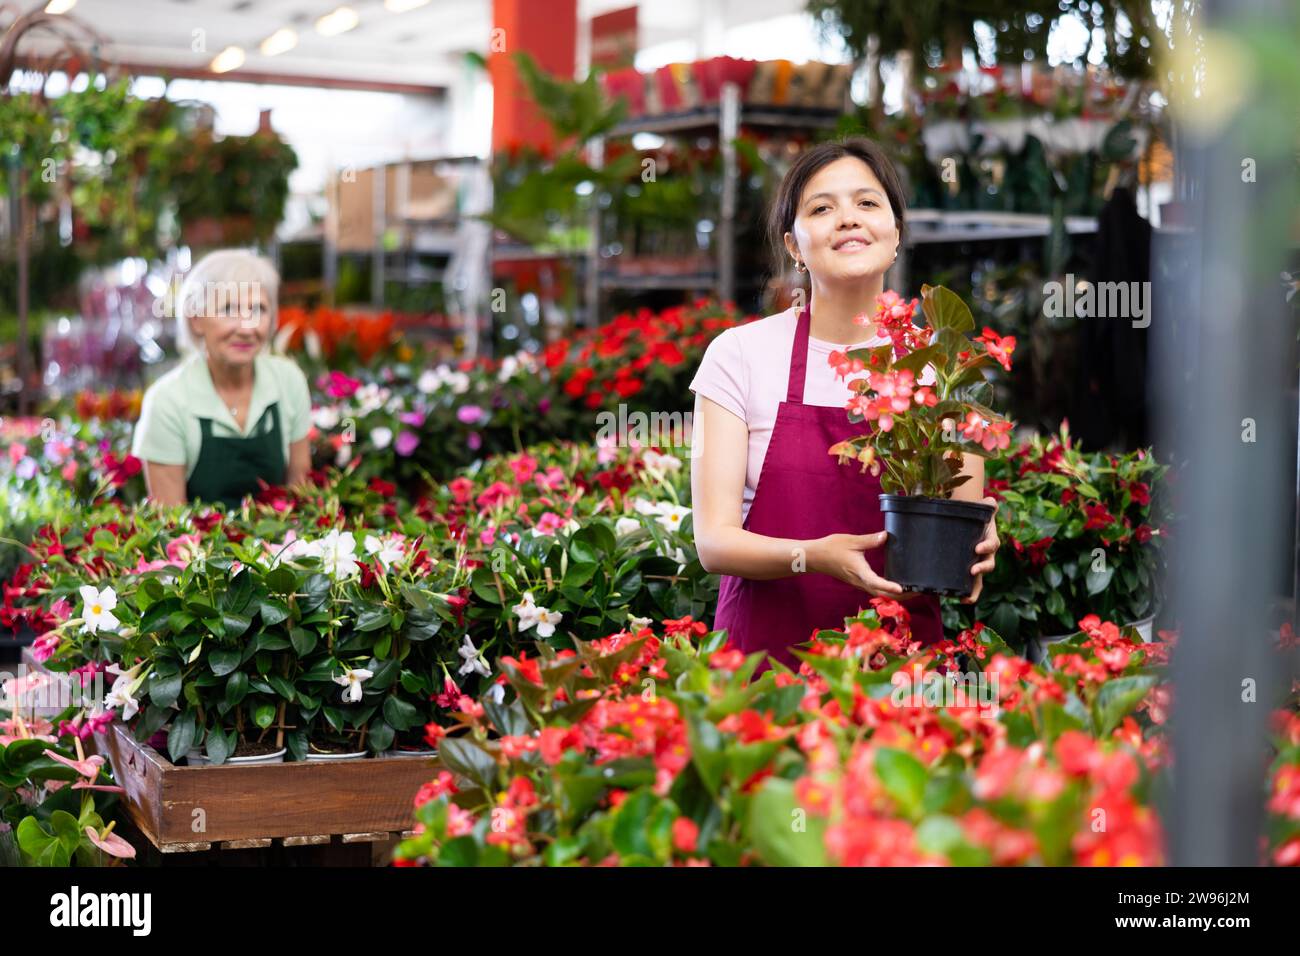 Smiling middle-aged saleswoman holding big begonia in flower pot in open-air plants market Stock Photo